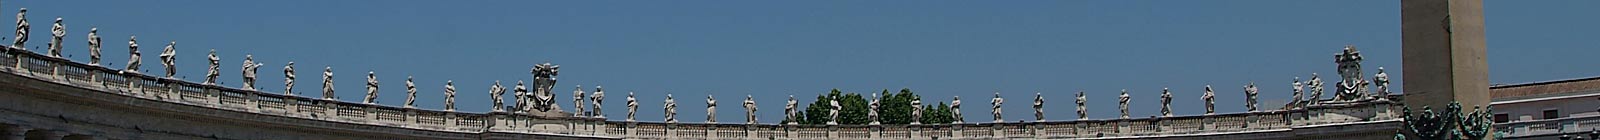 Rome statues, St. Peters - Banner